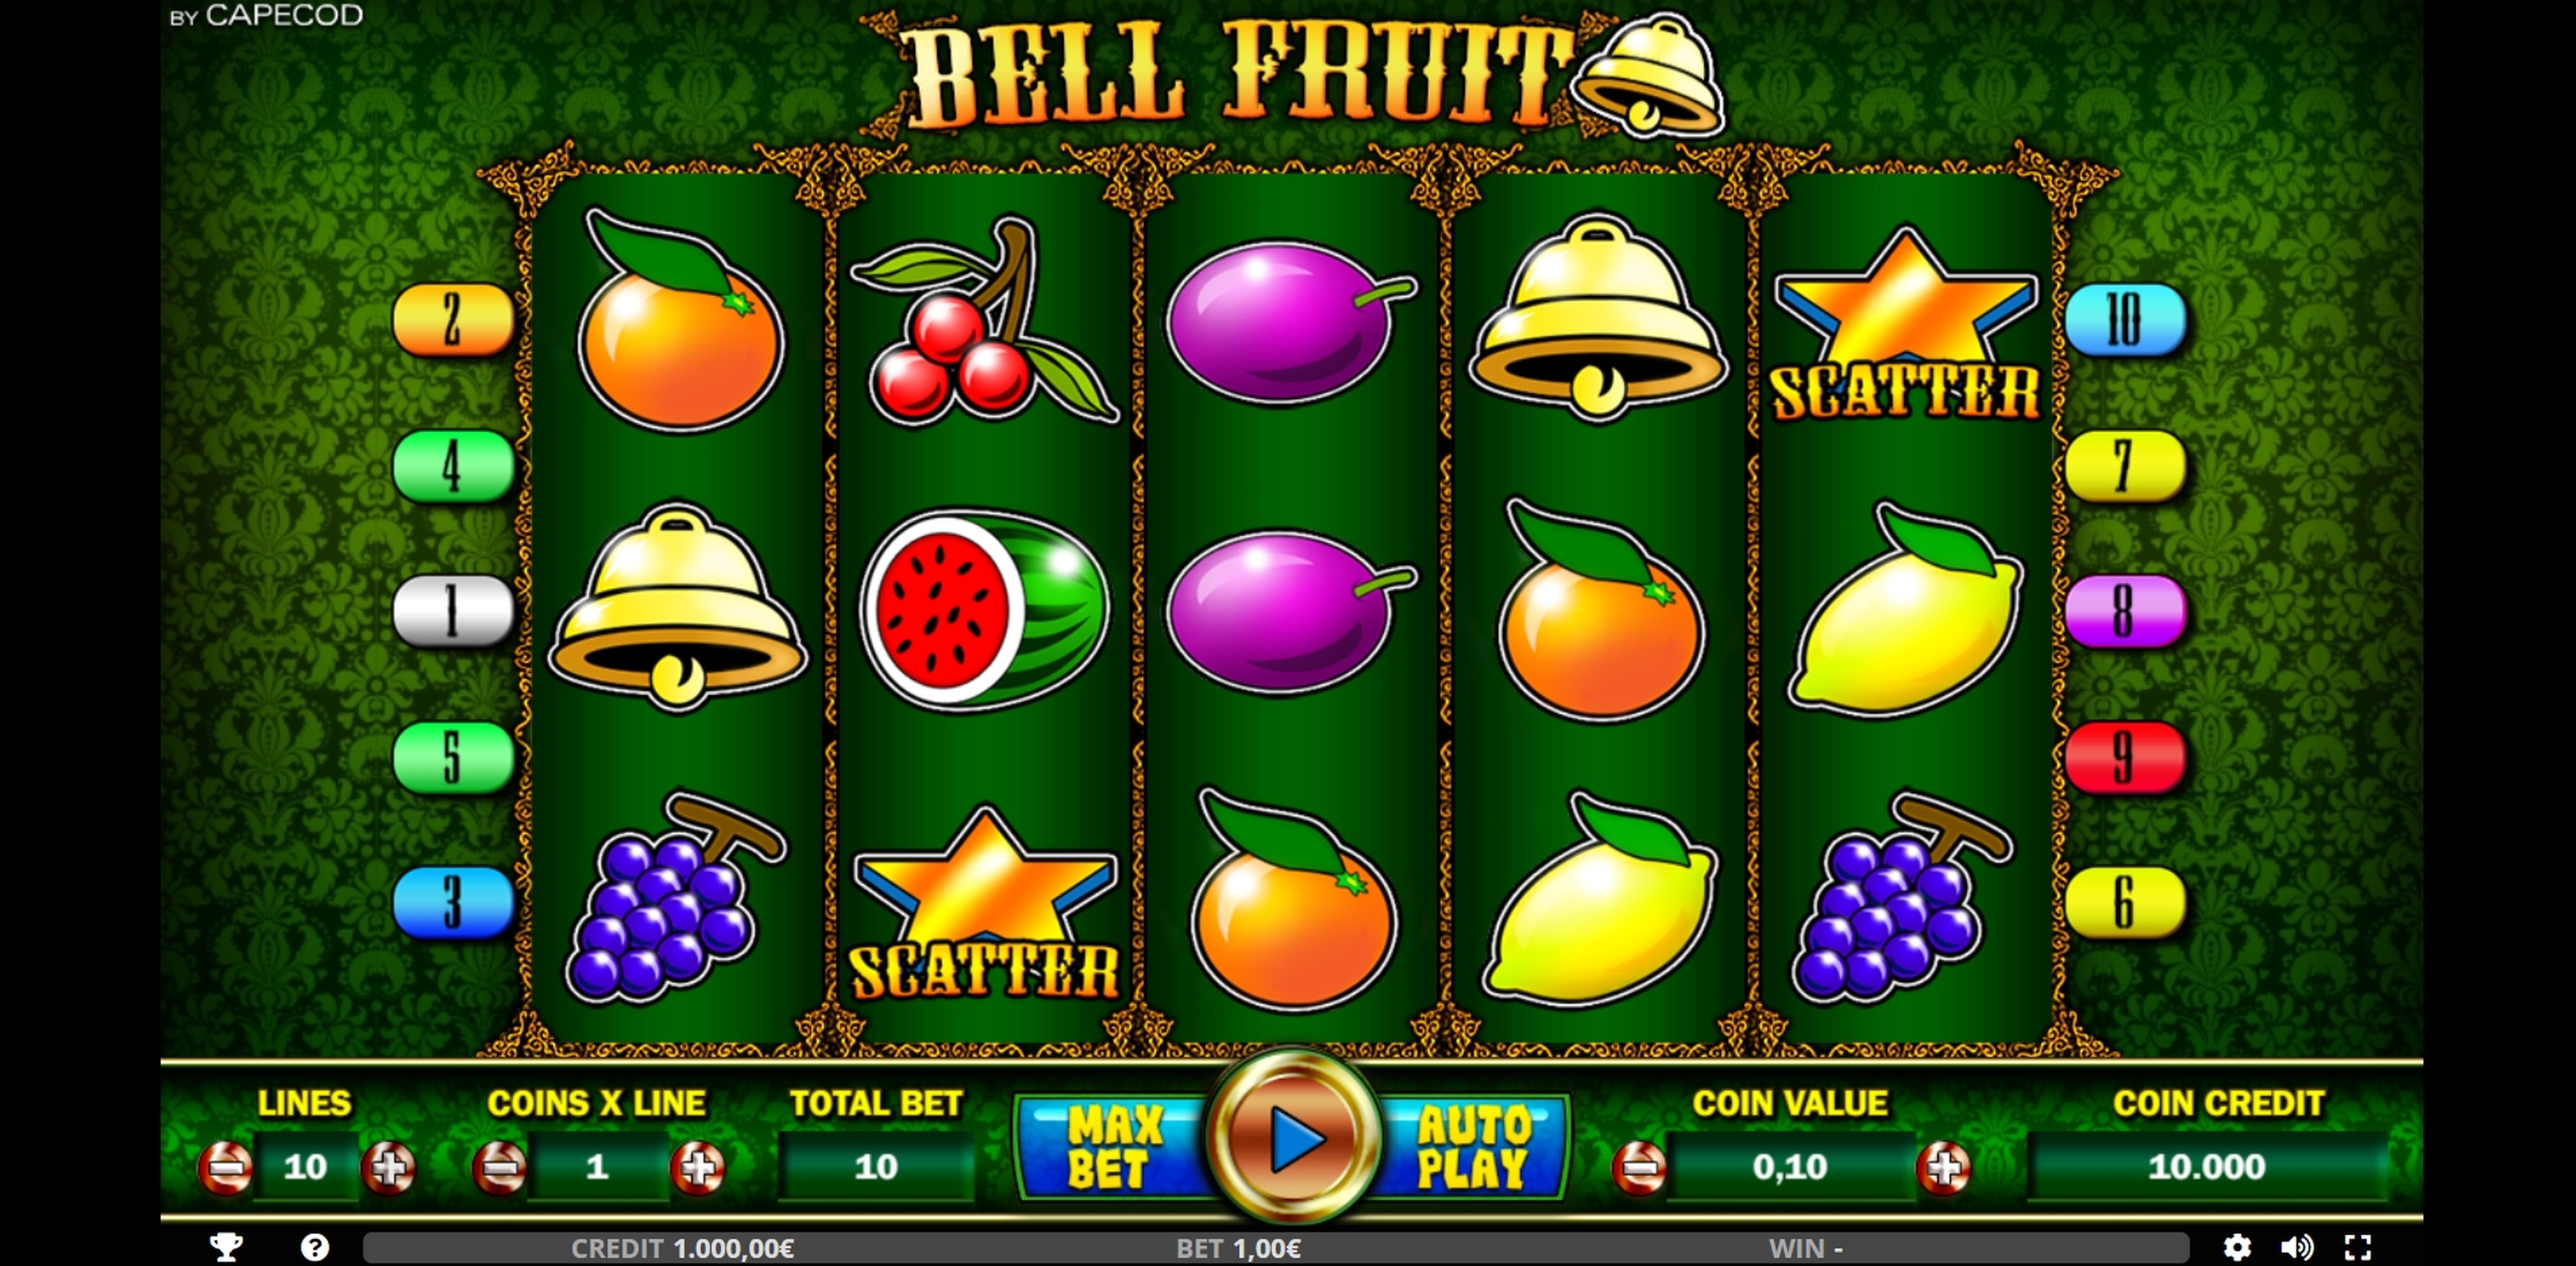 Reels in Bell Fruit Slot Game by Capecod Gaming